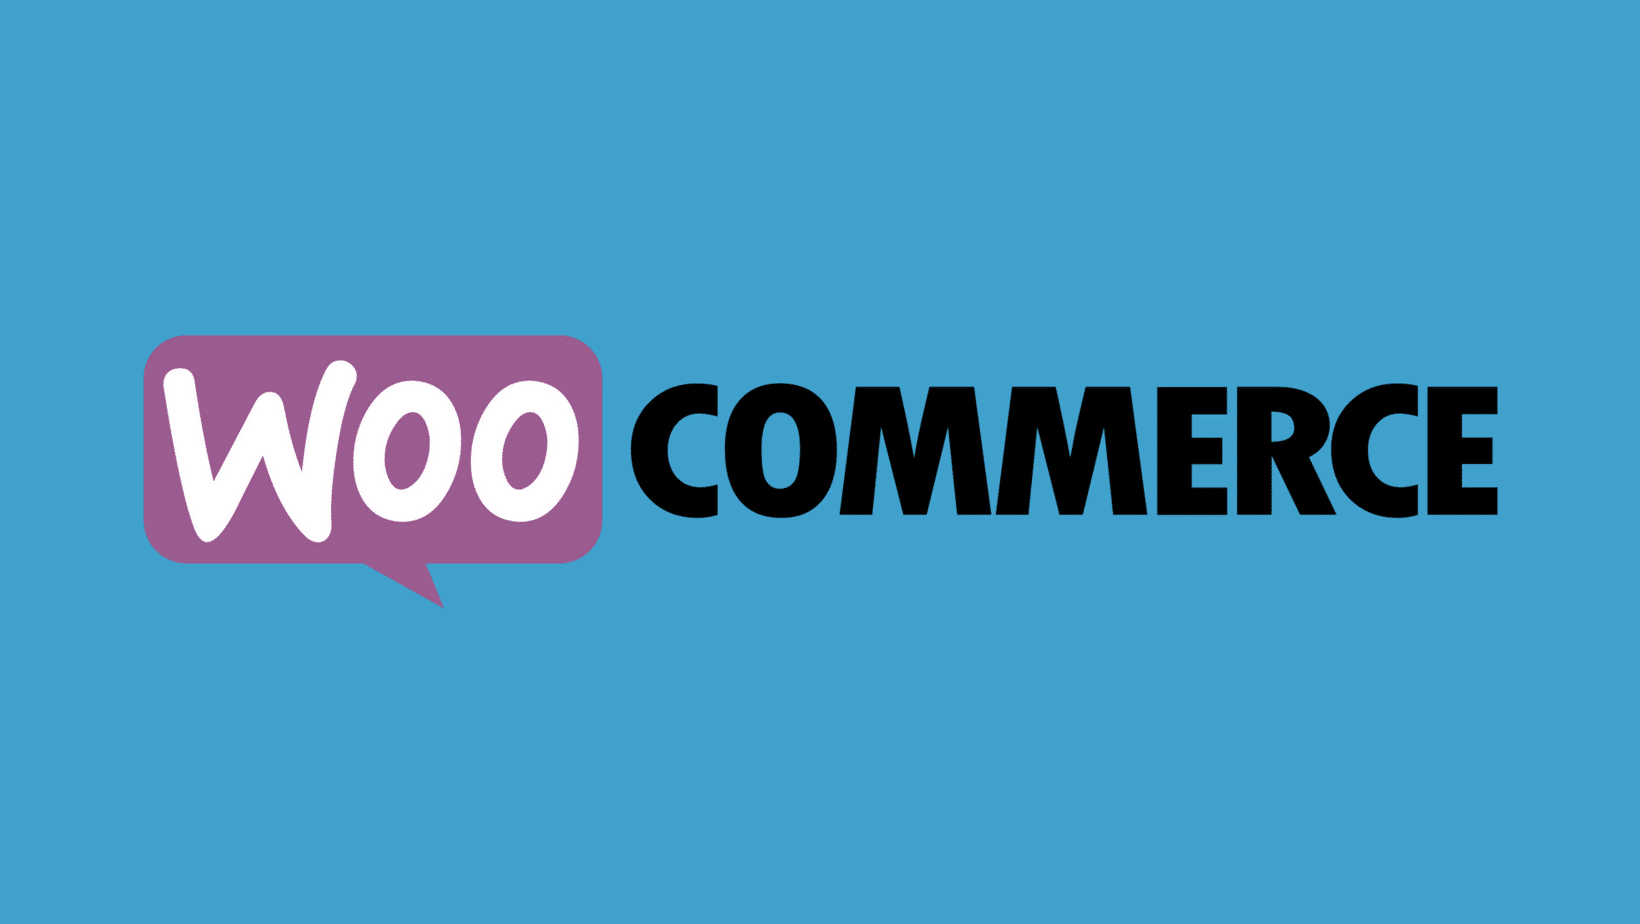 What are the Key Features of WooCommerce ?